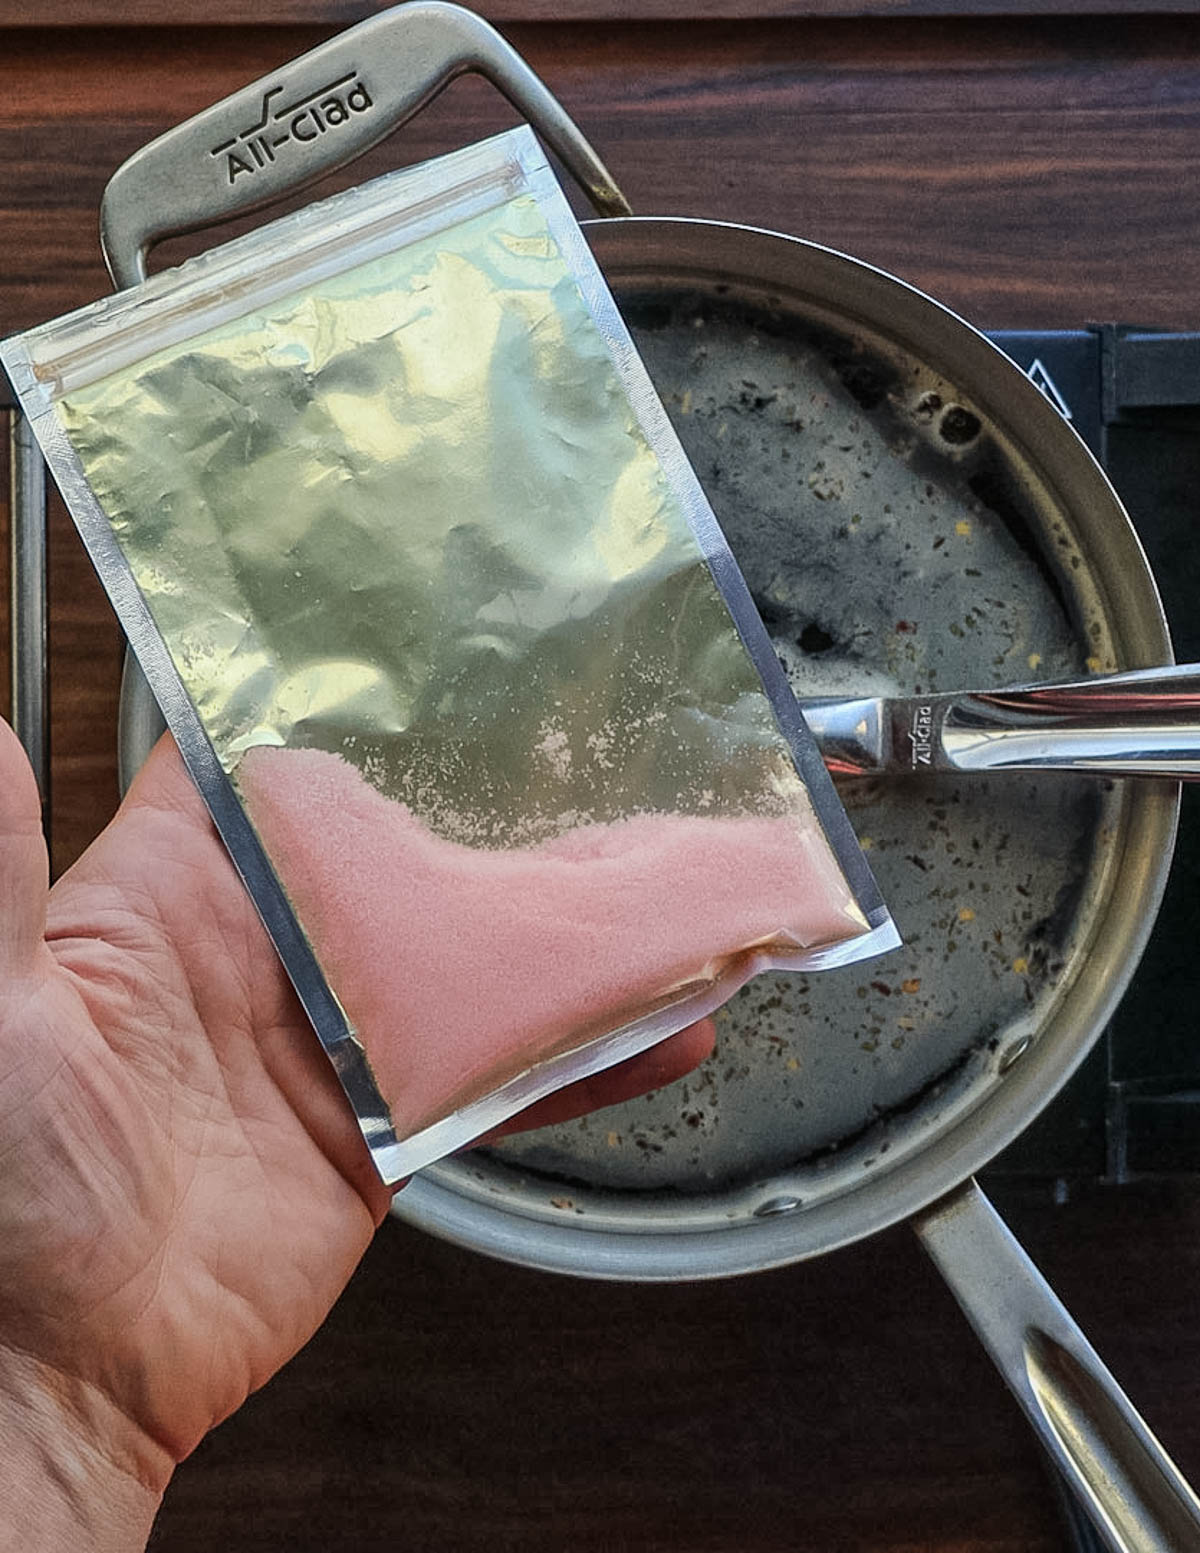 A hand holding a bag of pink curing salt or instacure number 1.